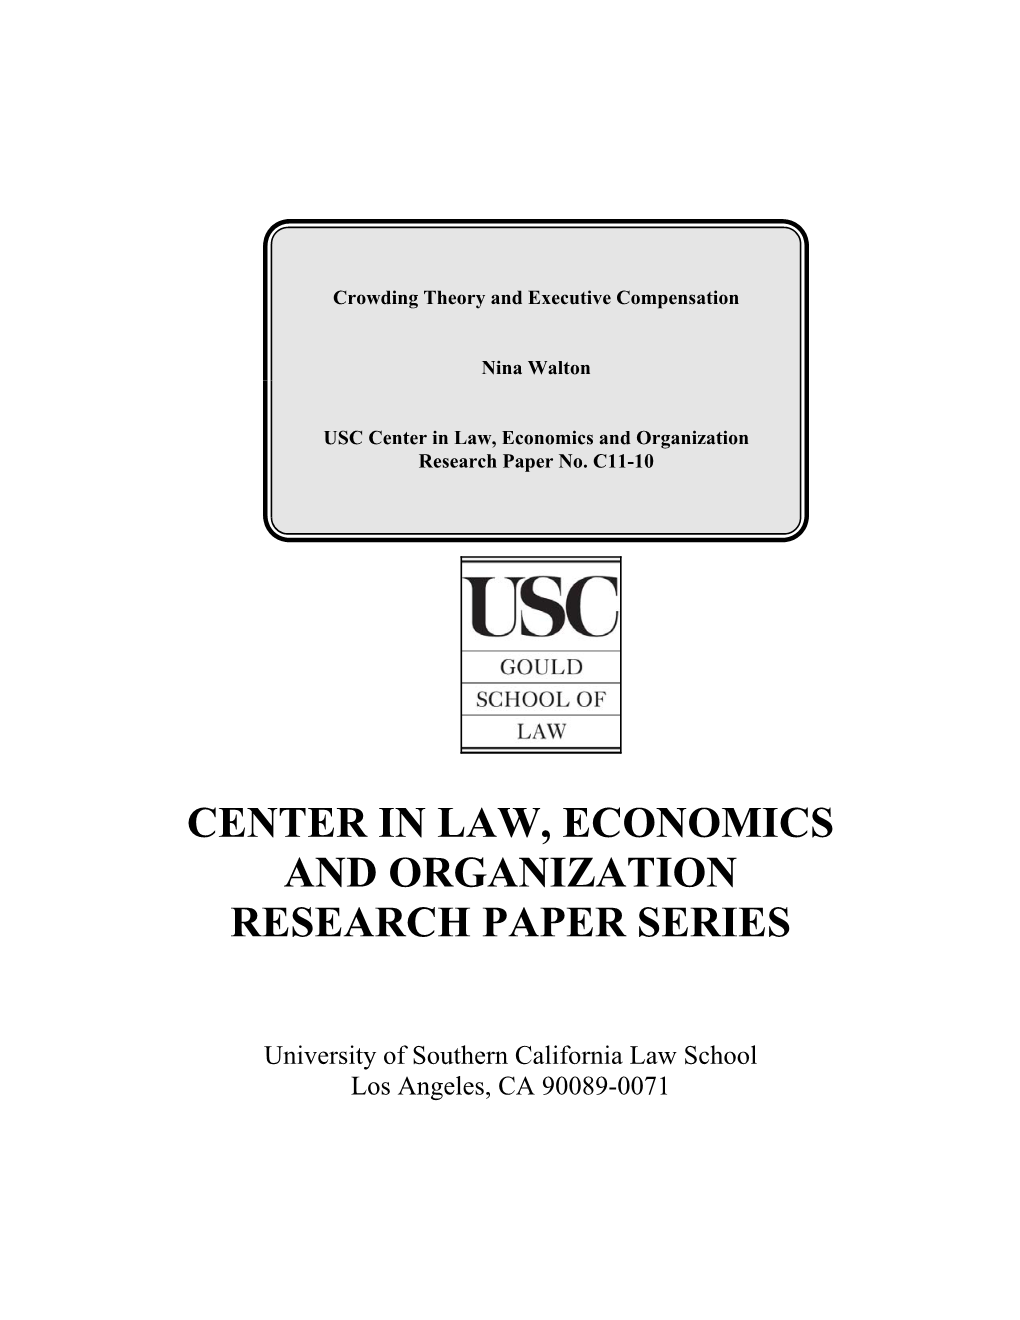 Crowding Theory and Executive Compensation FINAL